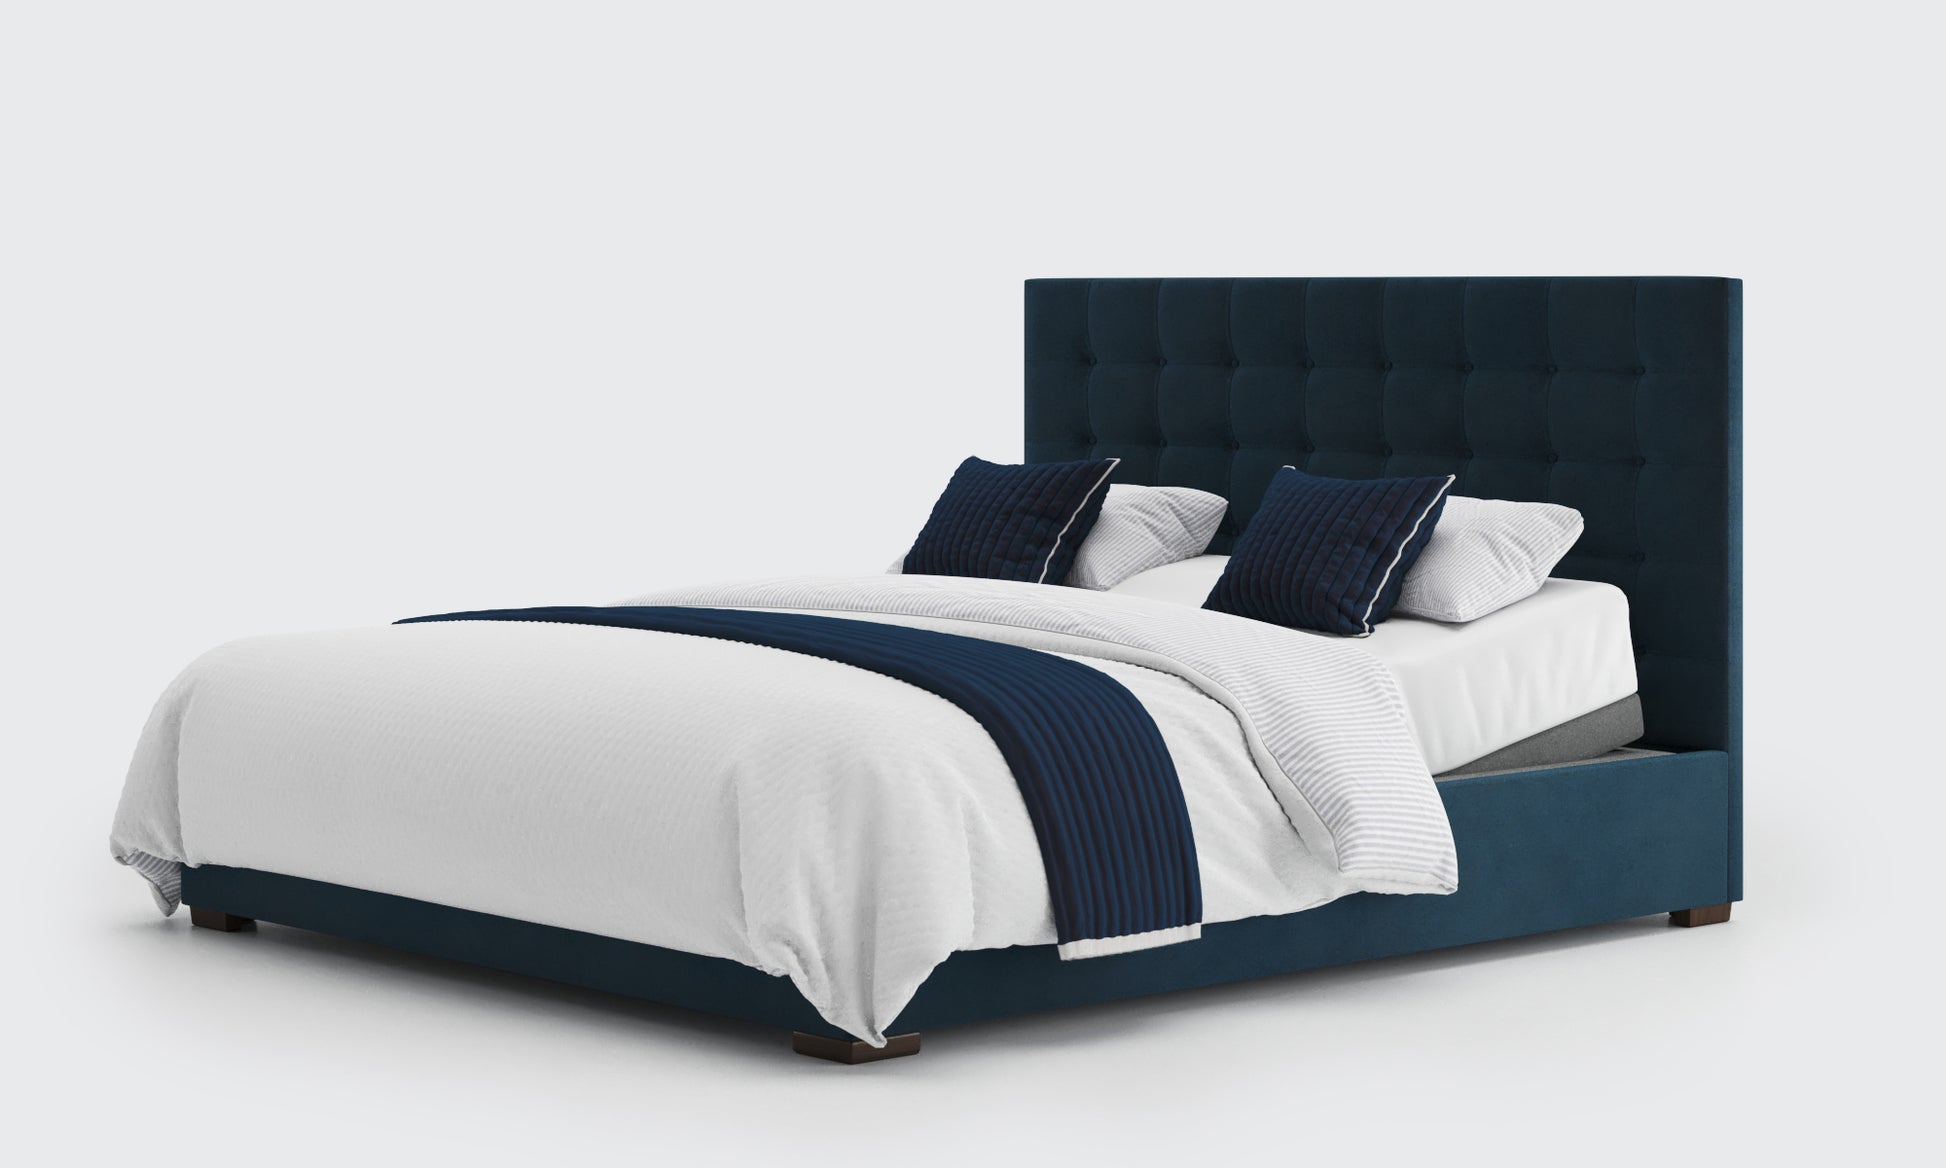 yorke 6ft double bed and mattress in the royal velvet material